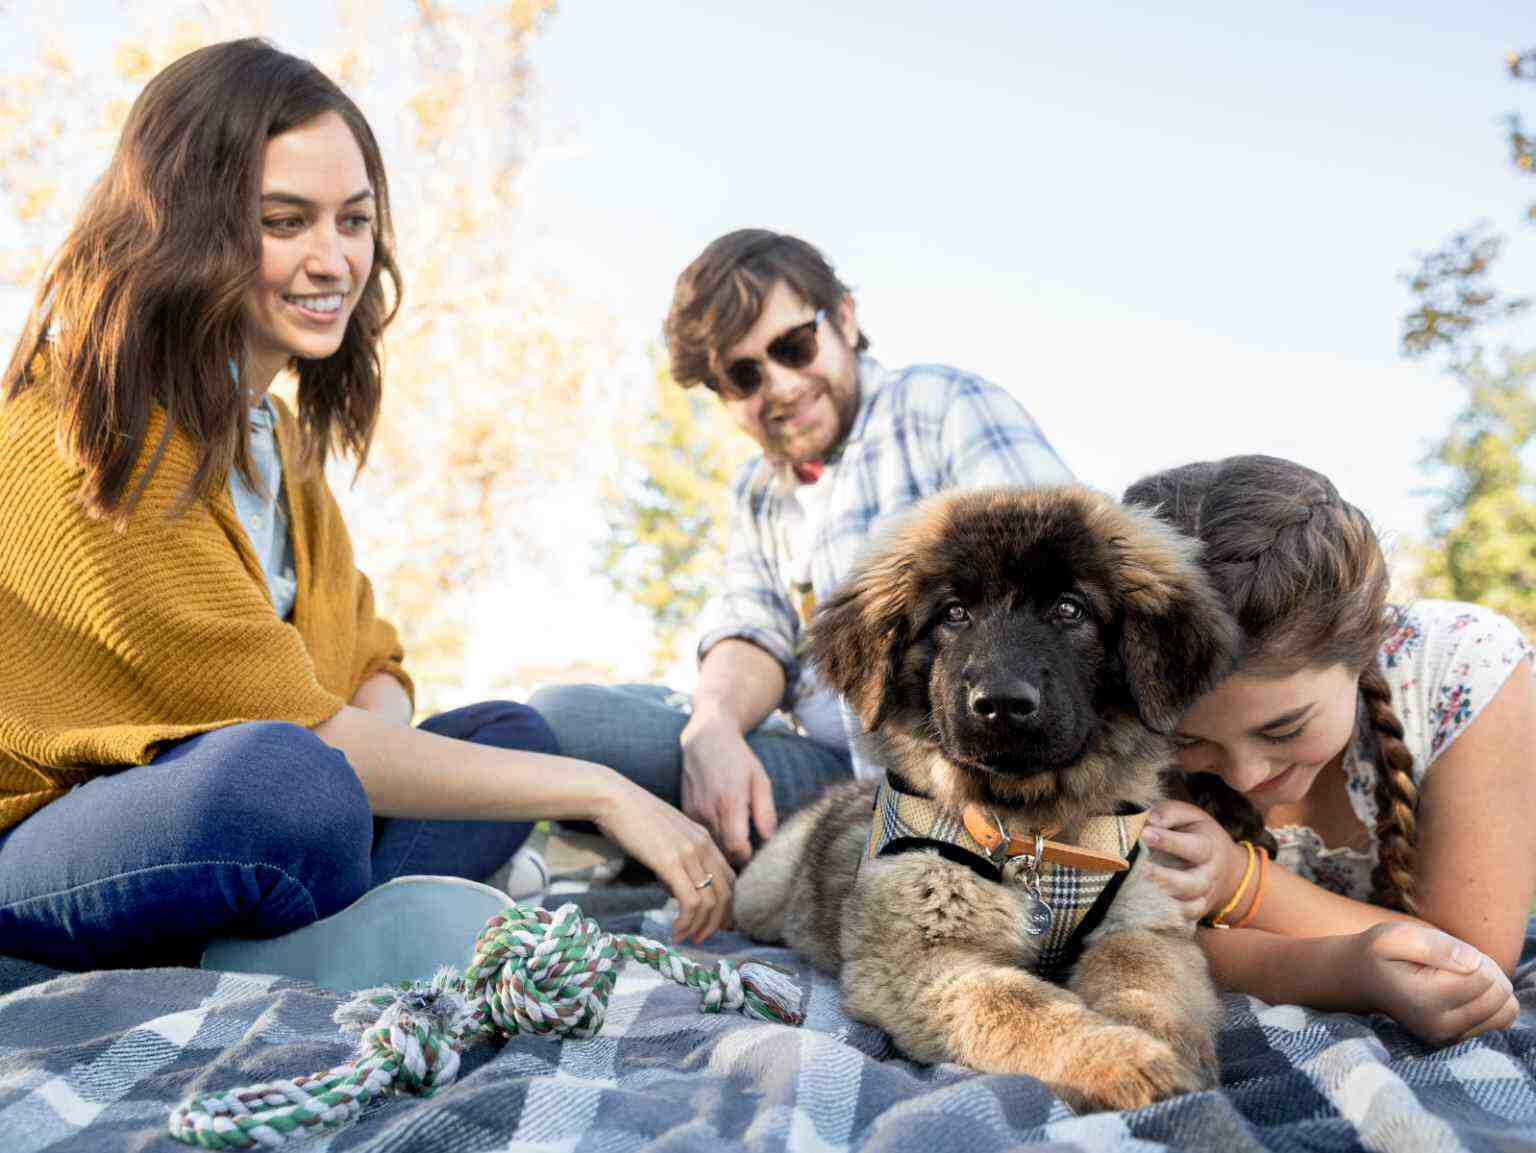 family play with puppy on picnic blanket